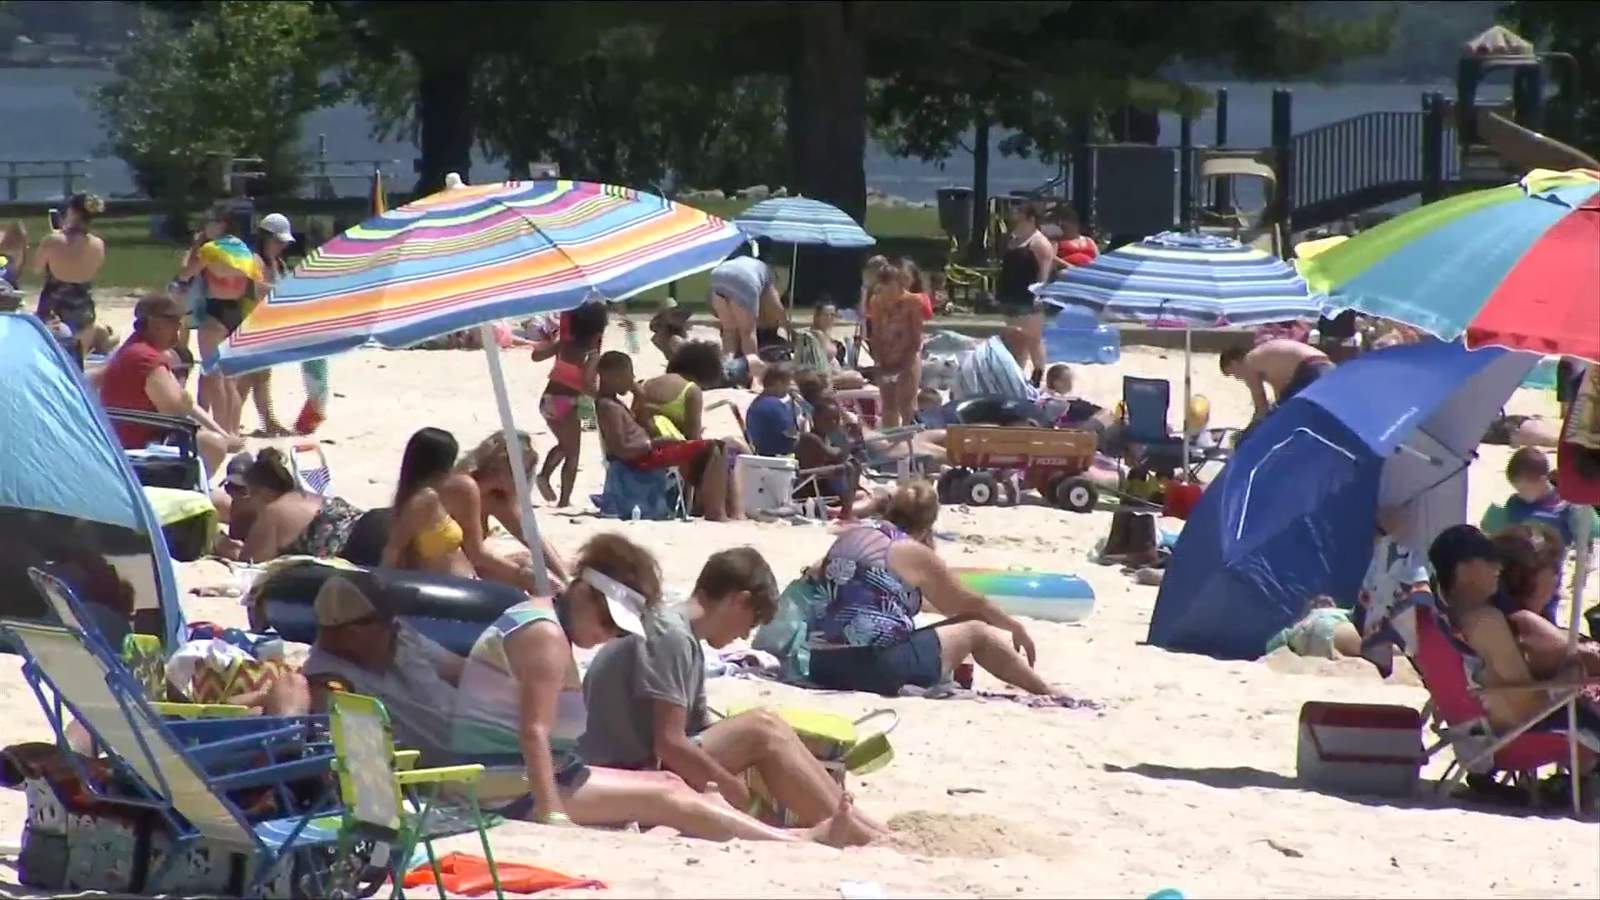 Hundreds come to Claytor Lake as beach reopens after coronavirus closure